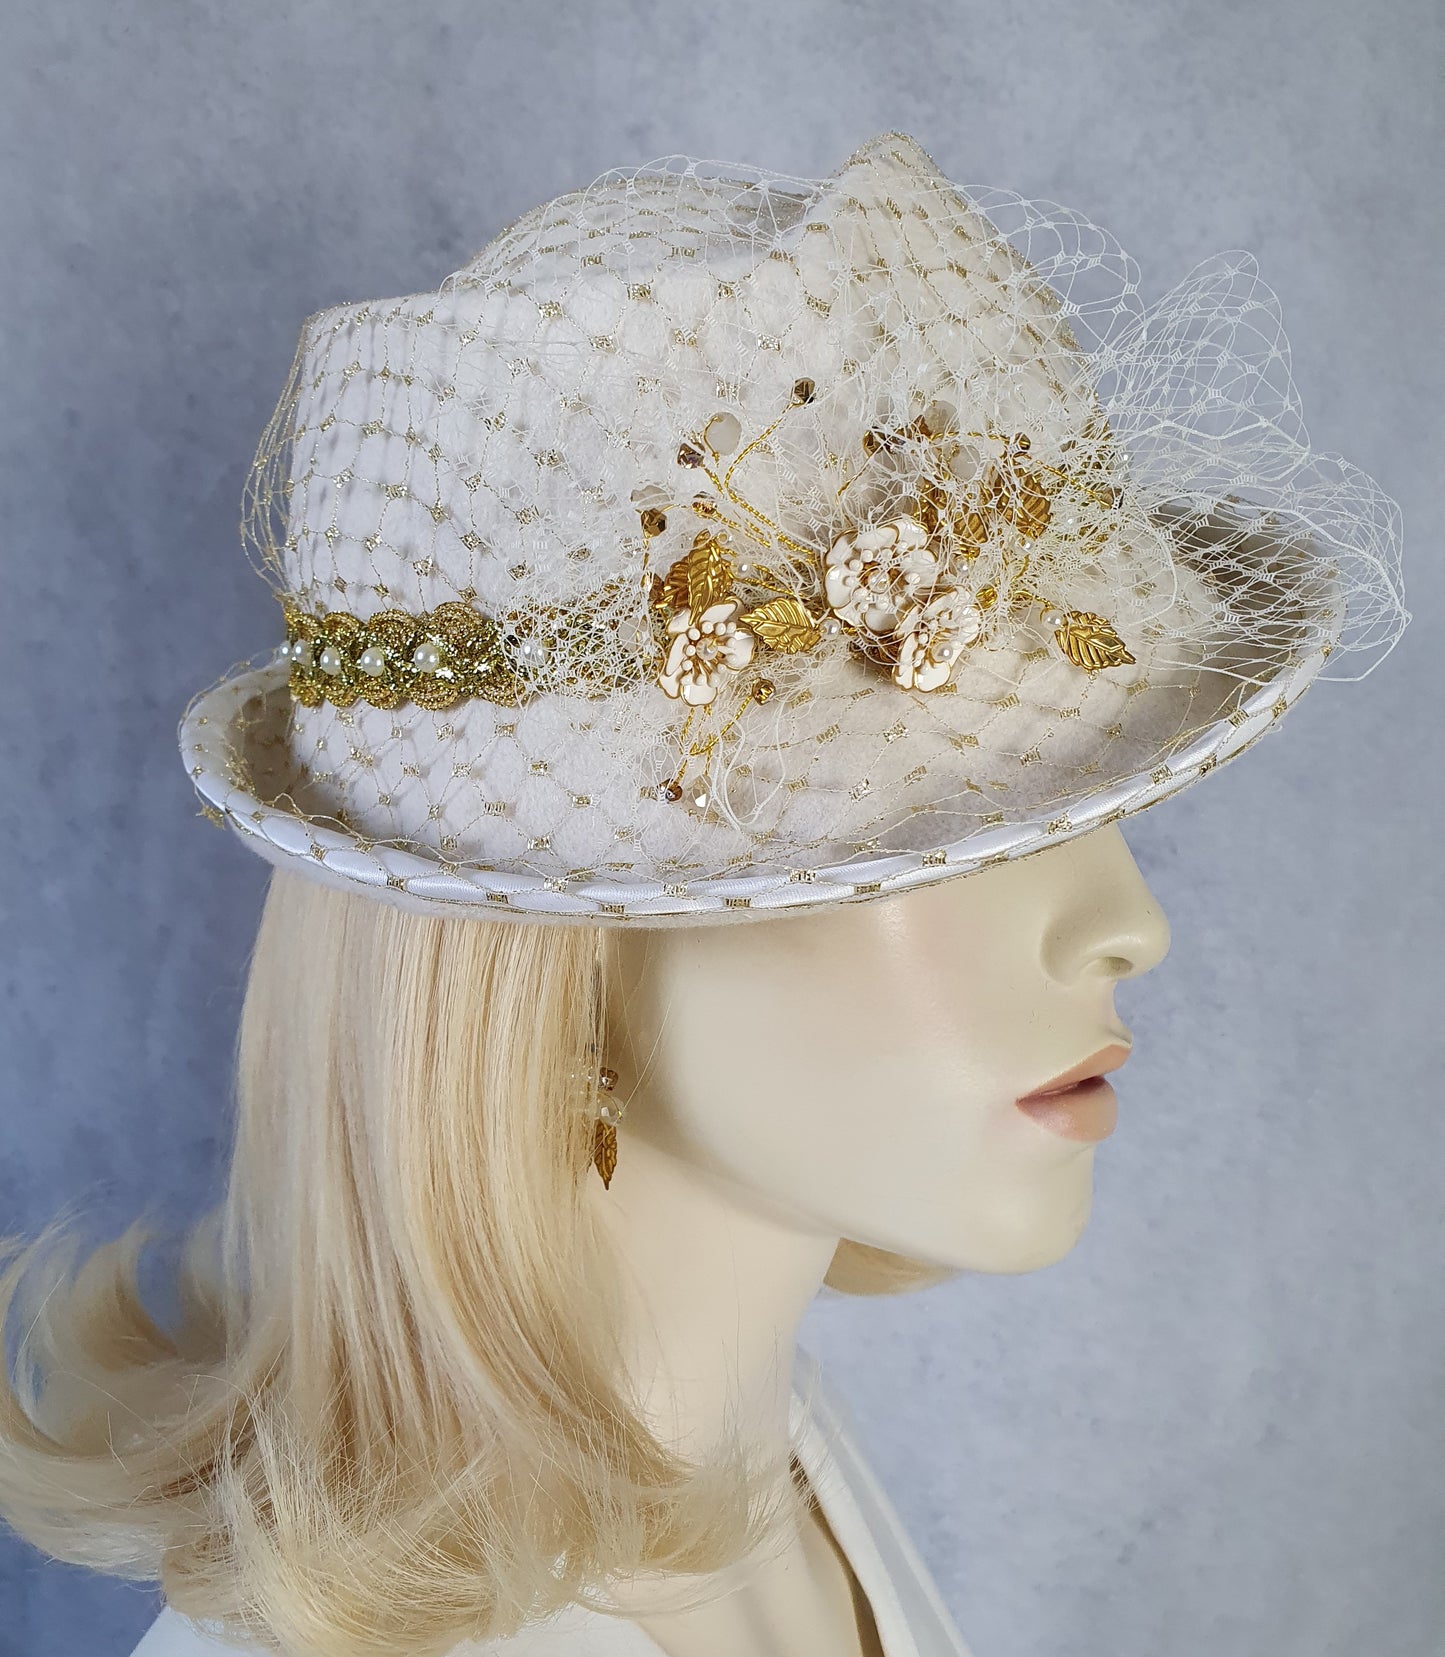 Women's hat Fedora made of ecru white felt with veil, handmade elegant bridal hat, for weddings or other special events.